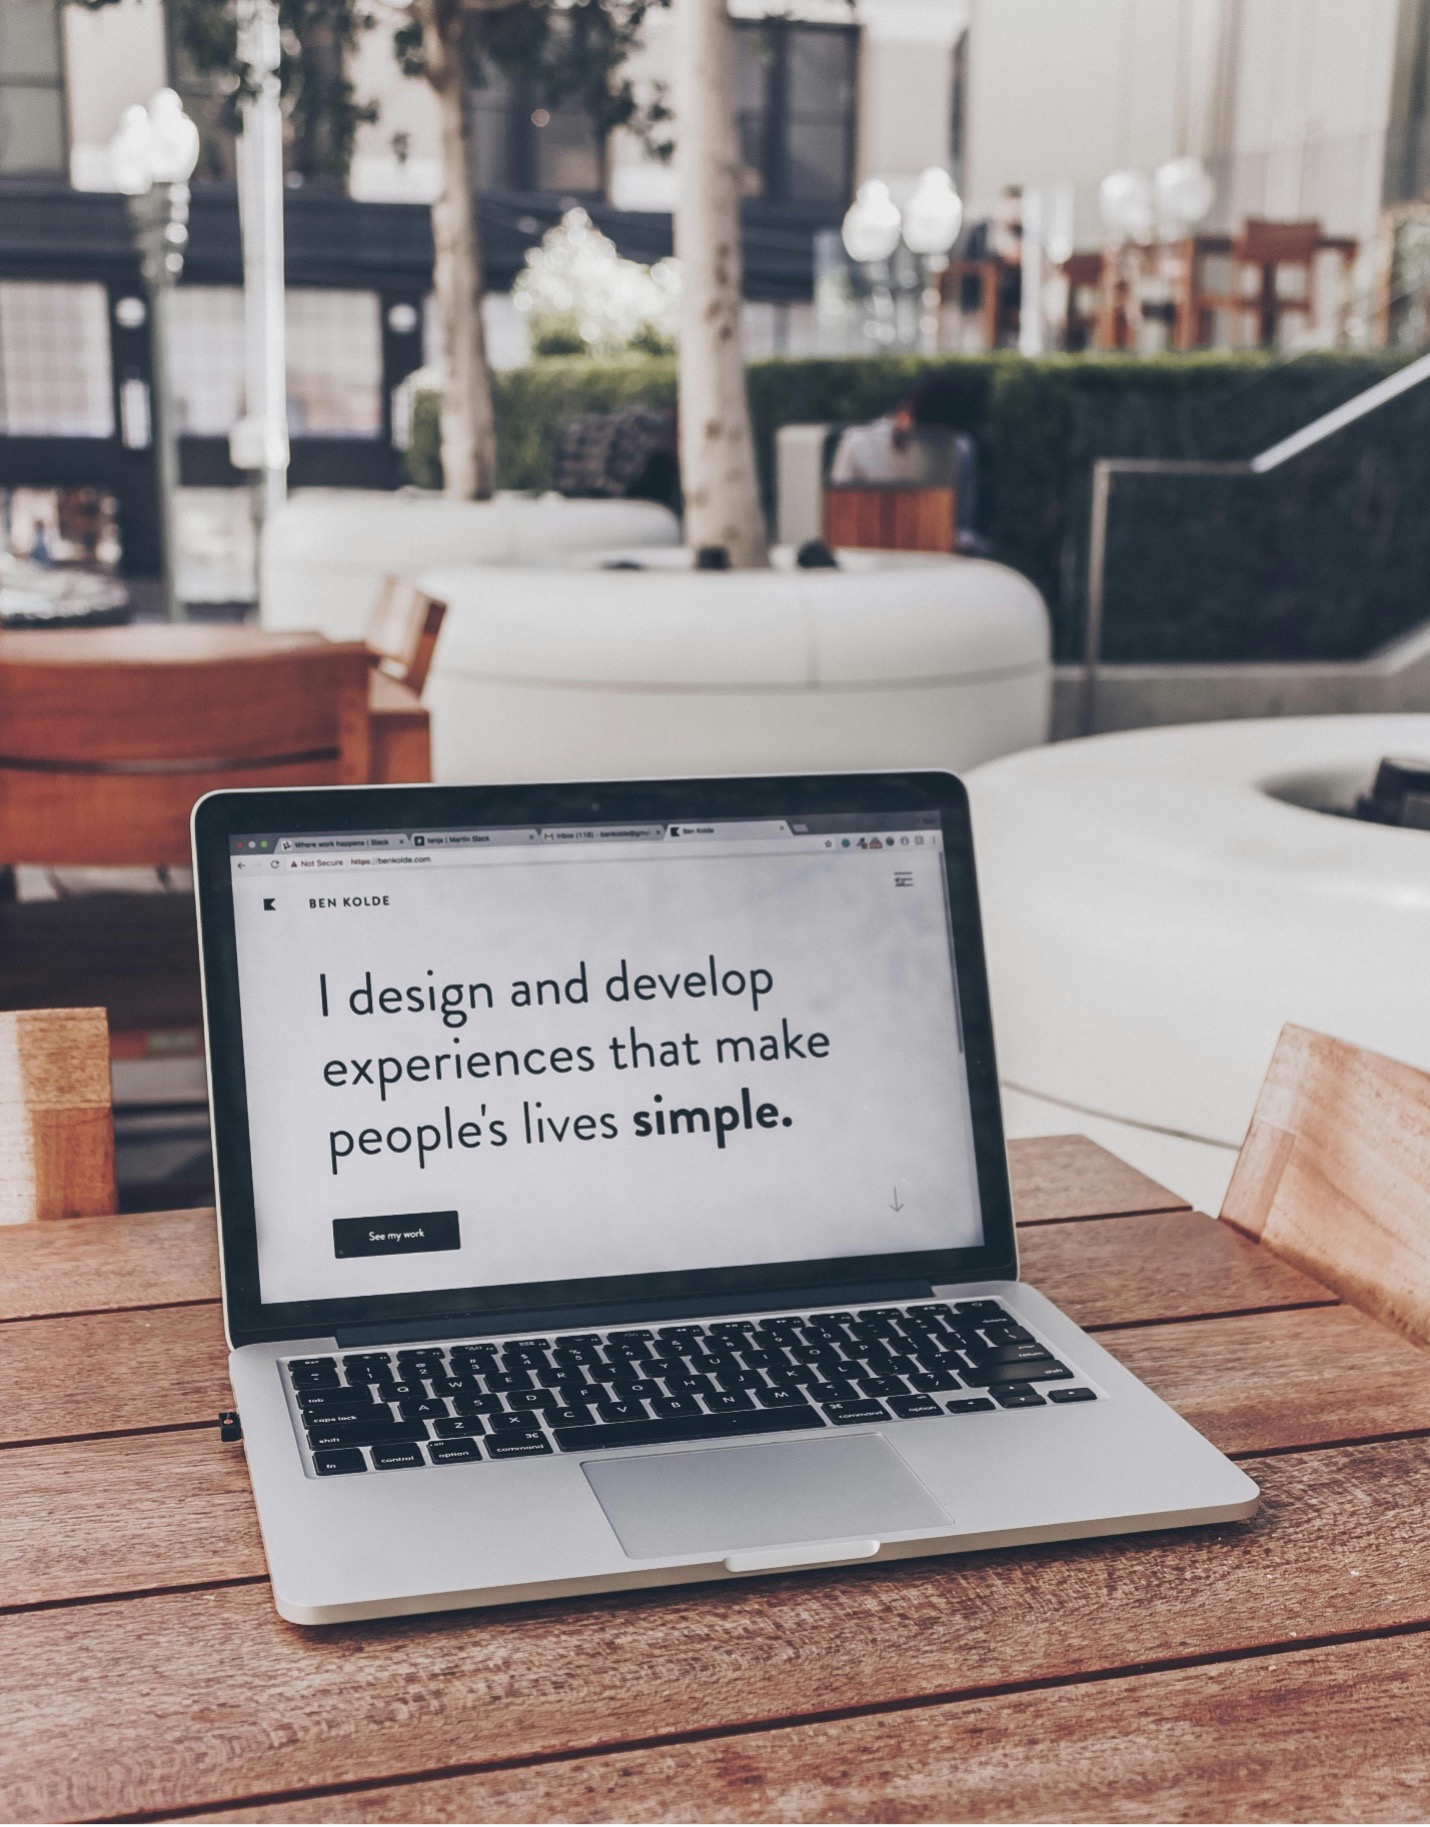 Photo of a laptop on a table with the words "I design and develop experiences that make people's lives simple."